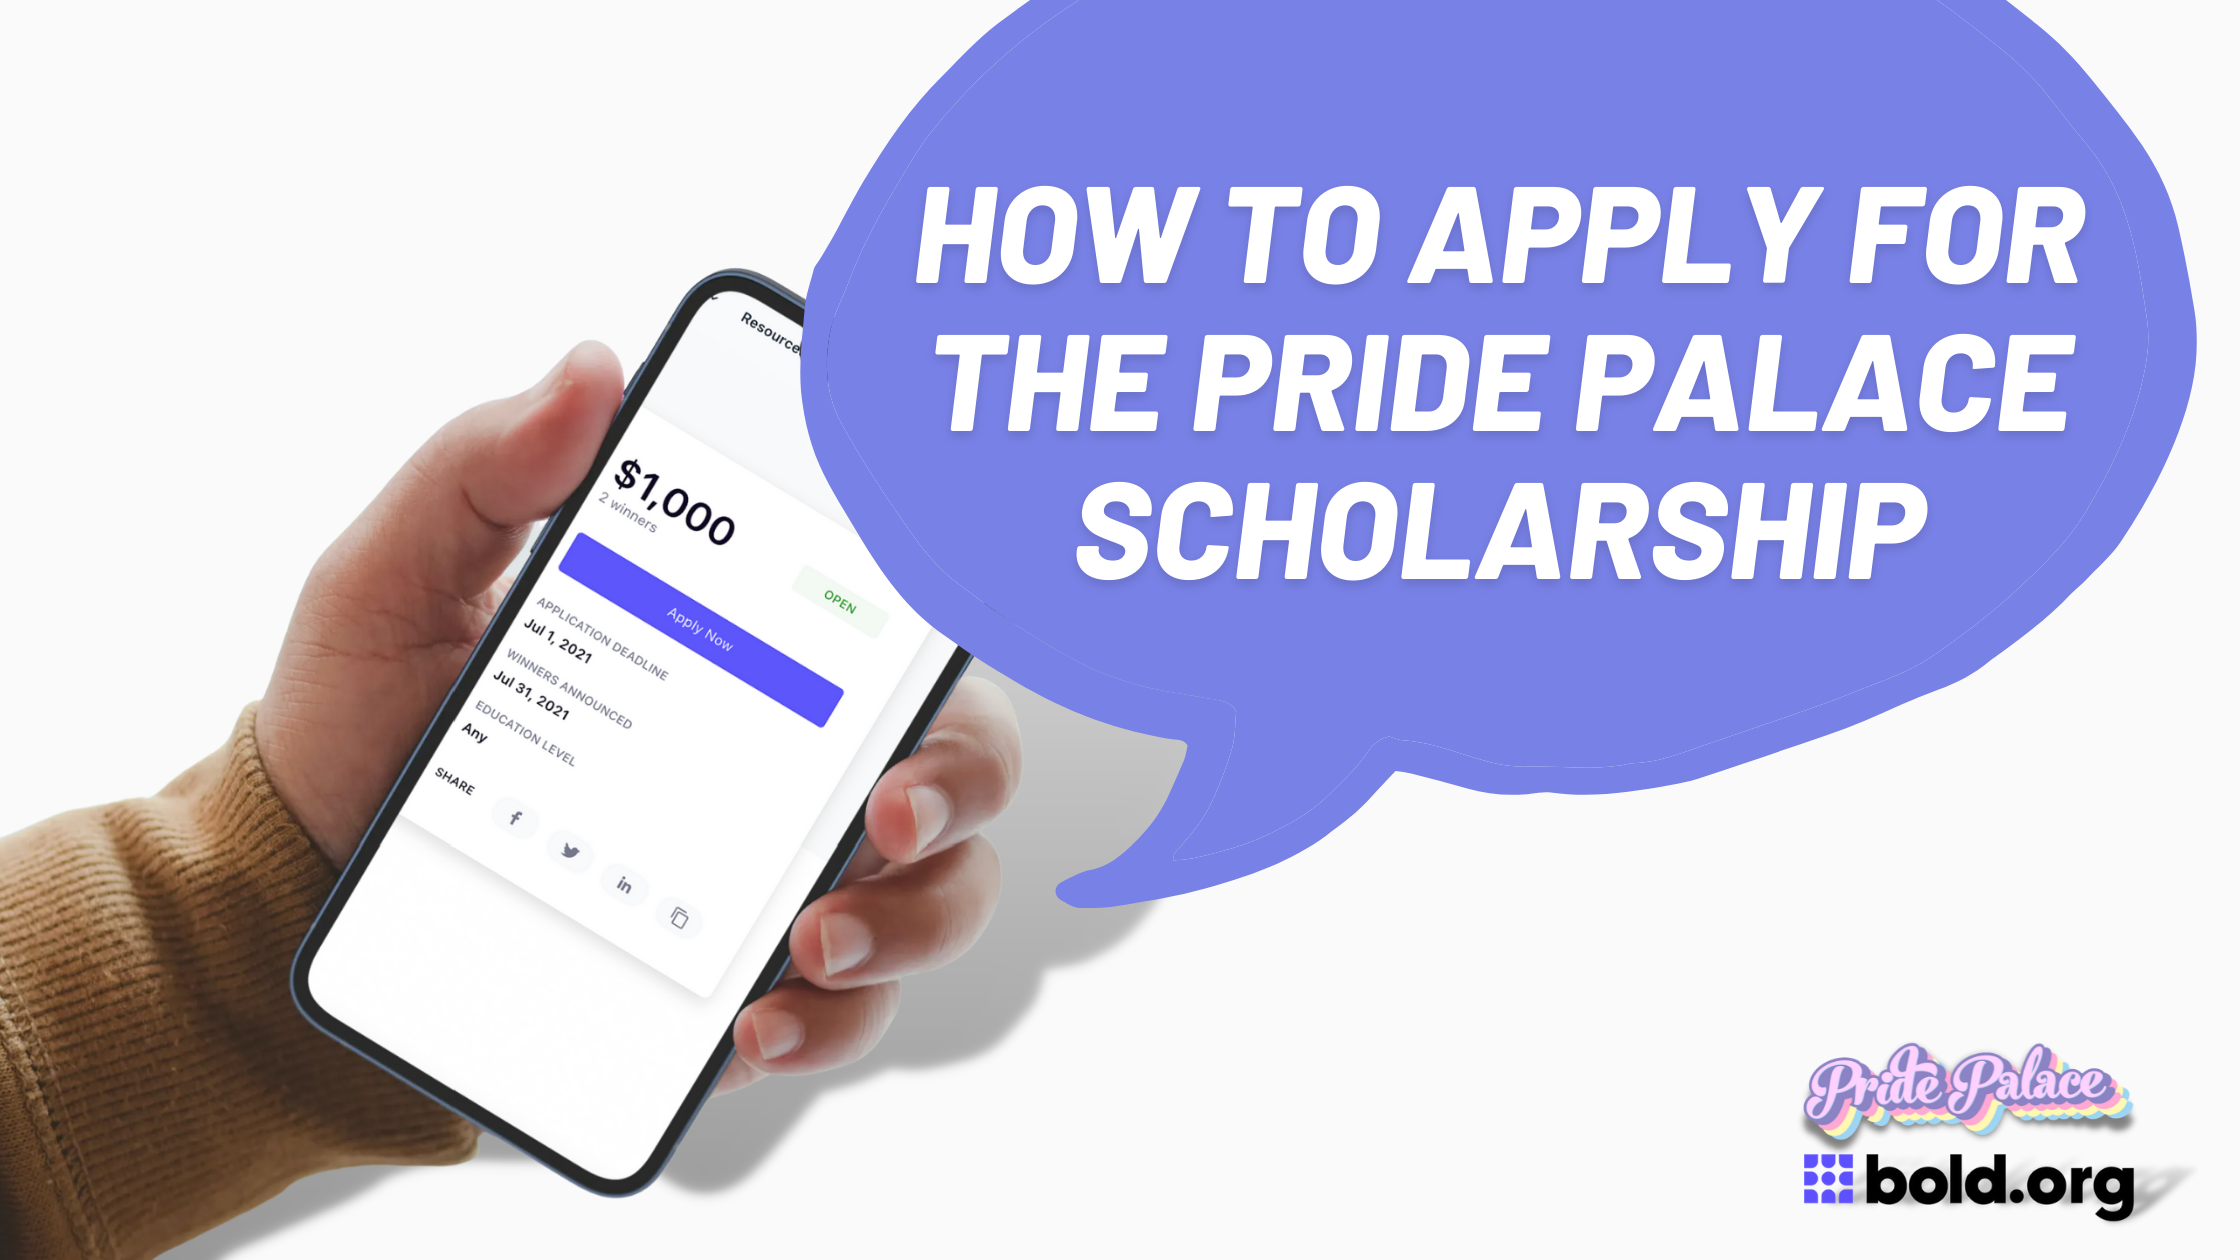 LGBTQ+ Scholarship: How You Can Apply For A Pride Palace Scholarship